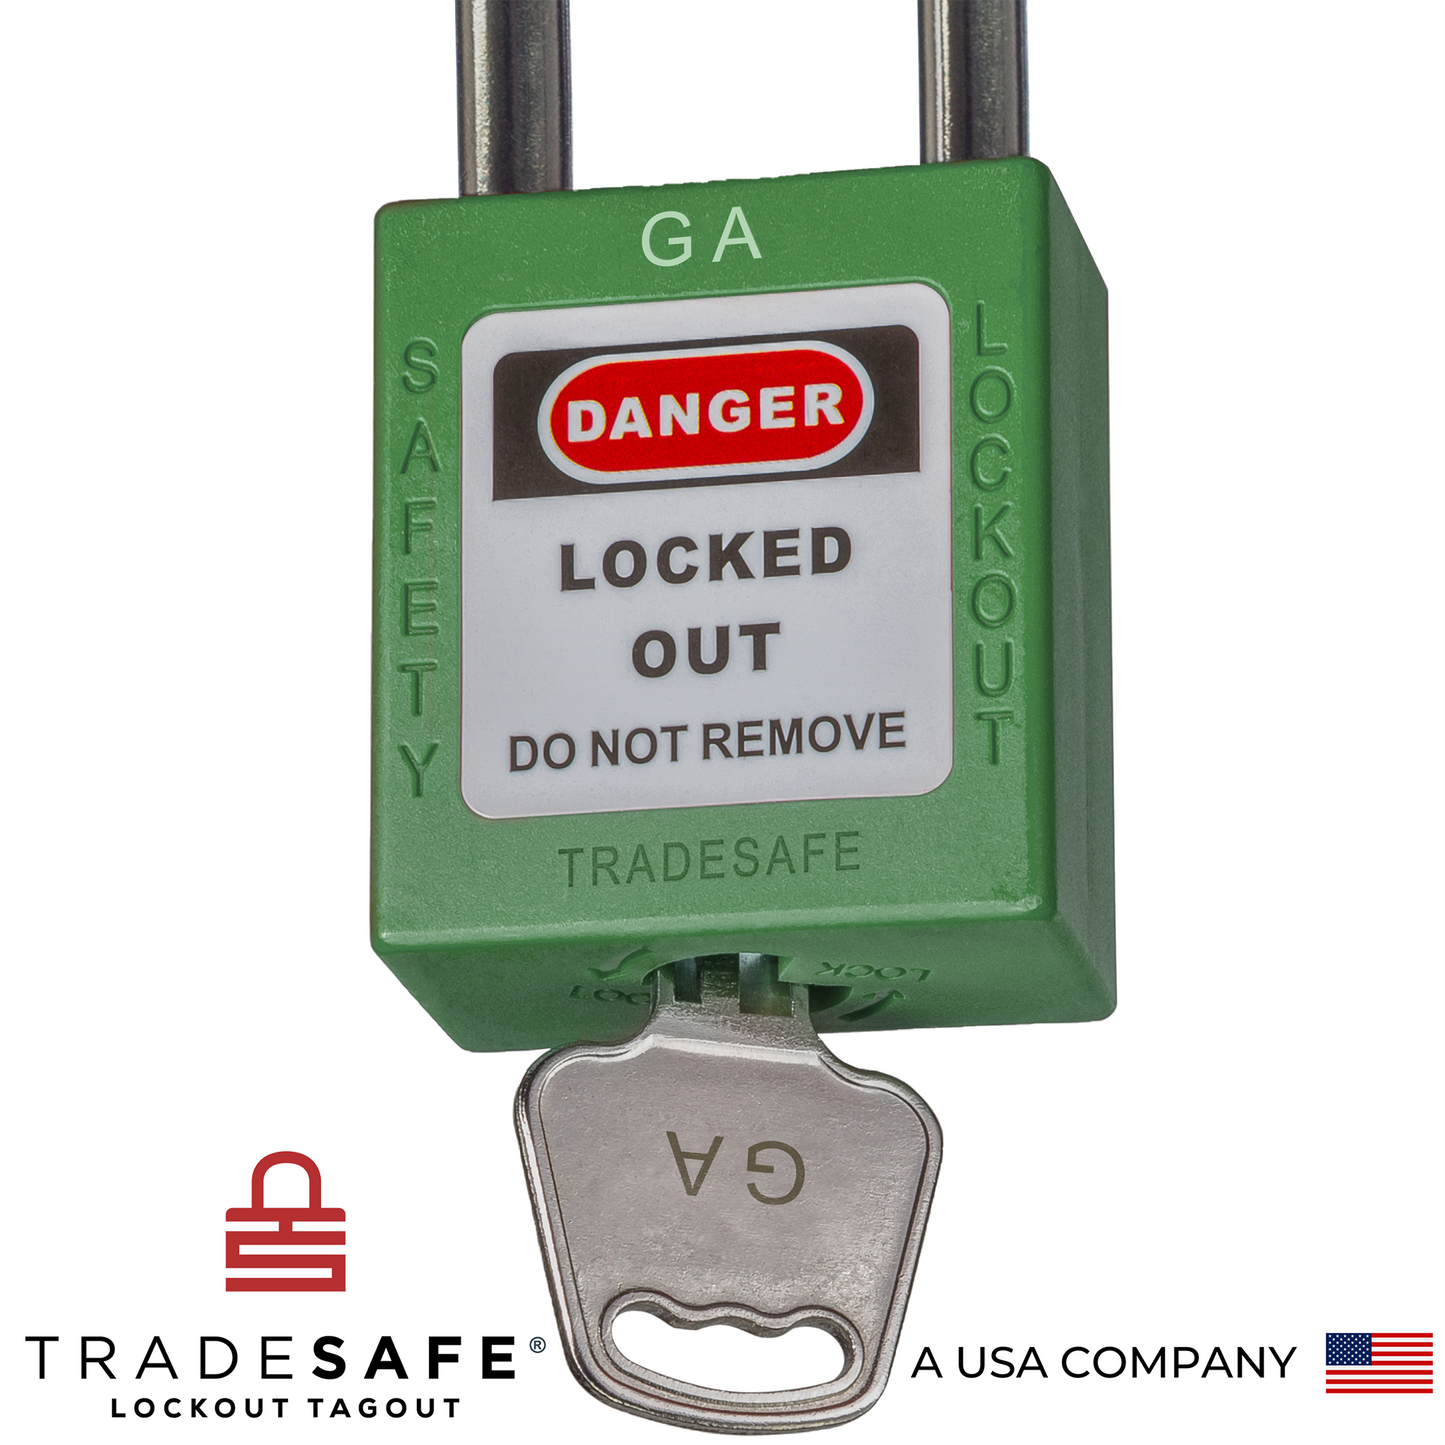 a close-up view of a green loto padlock's body with a key inserted